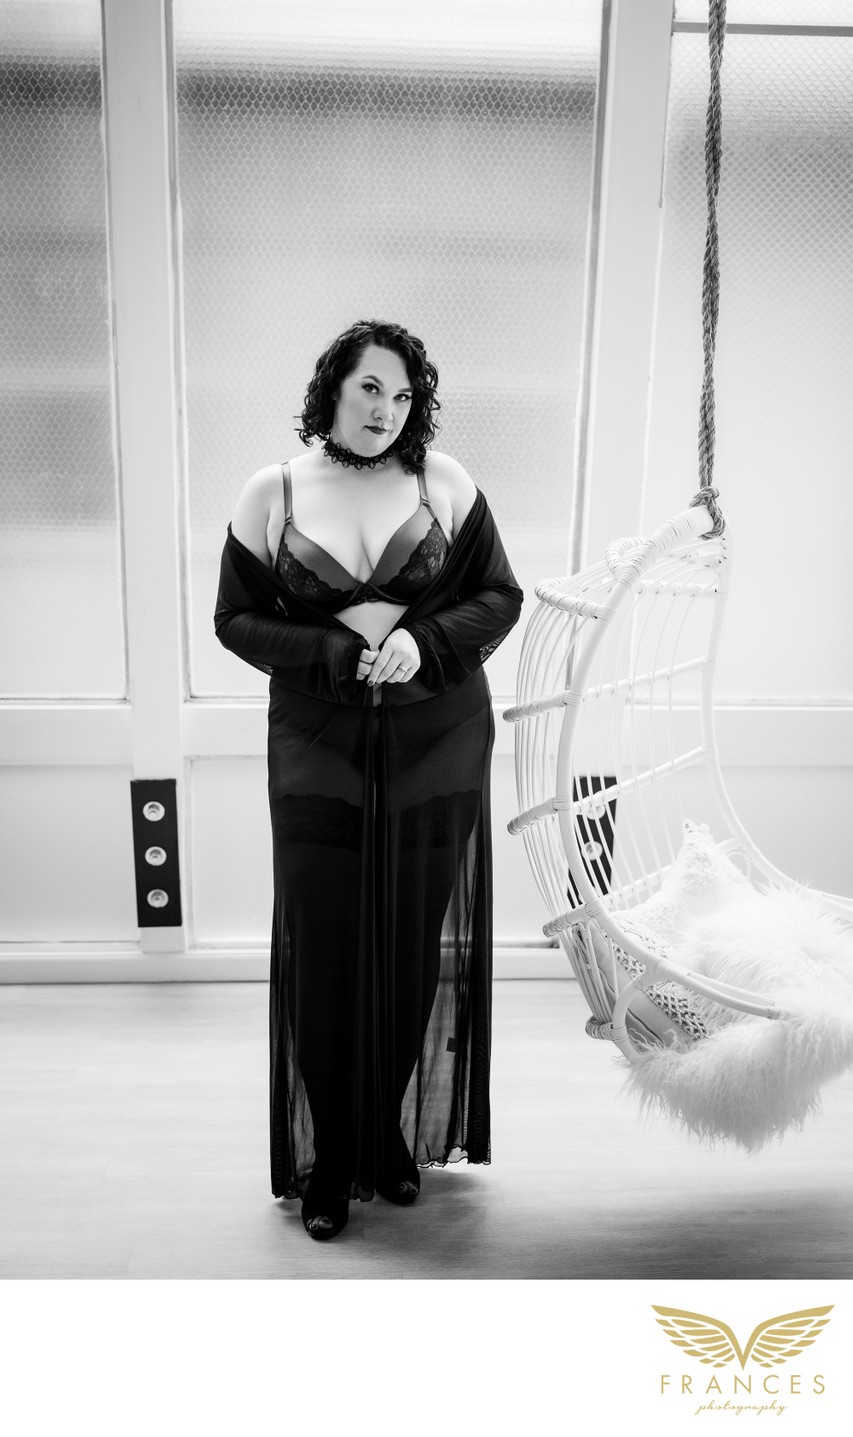 Plus Size Boudoir Image in Black and White